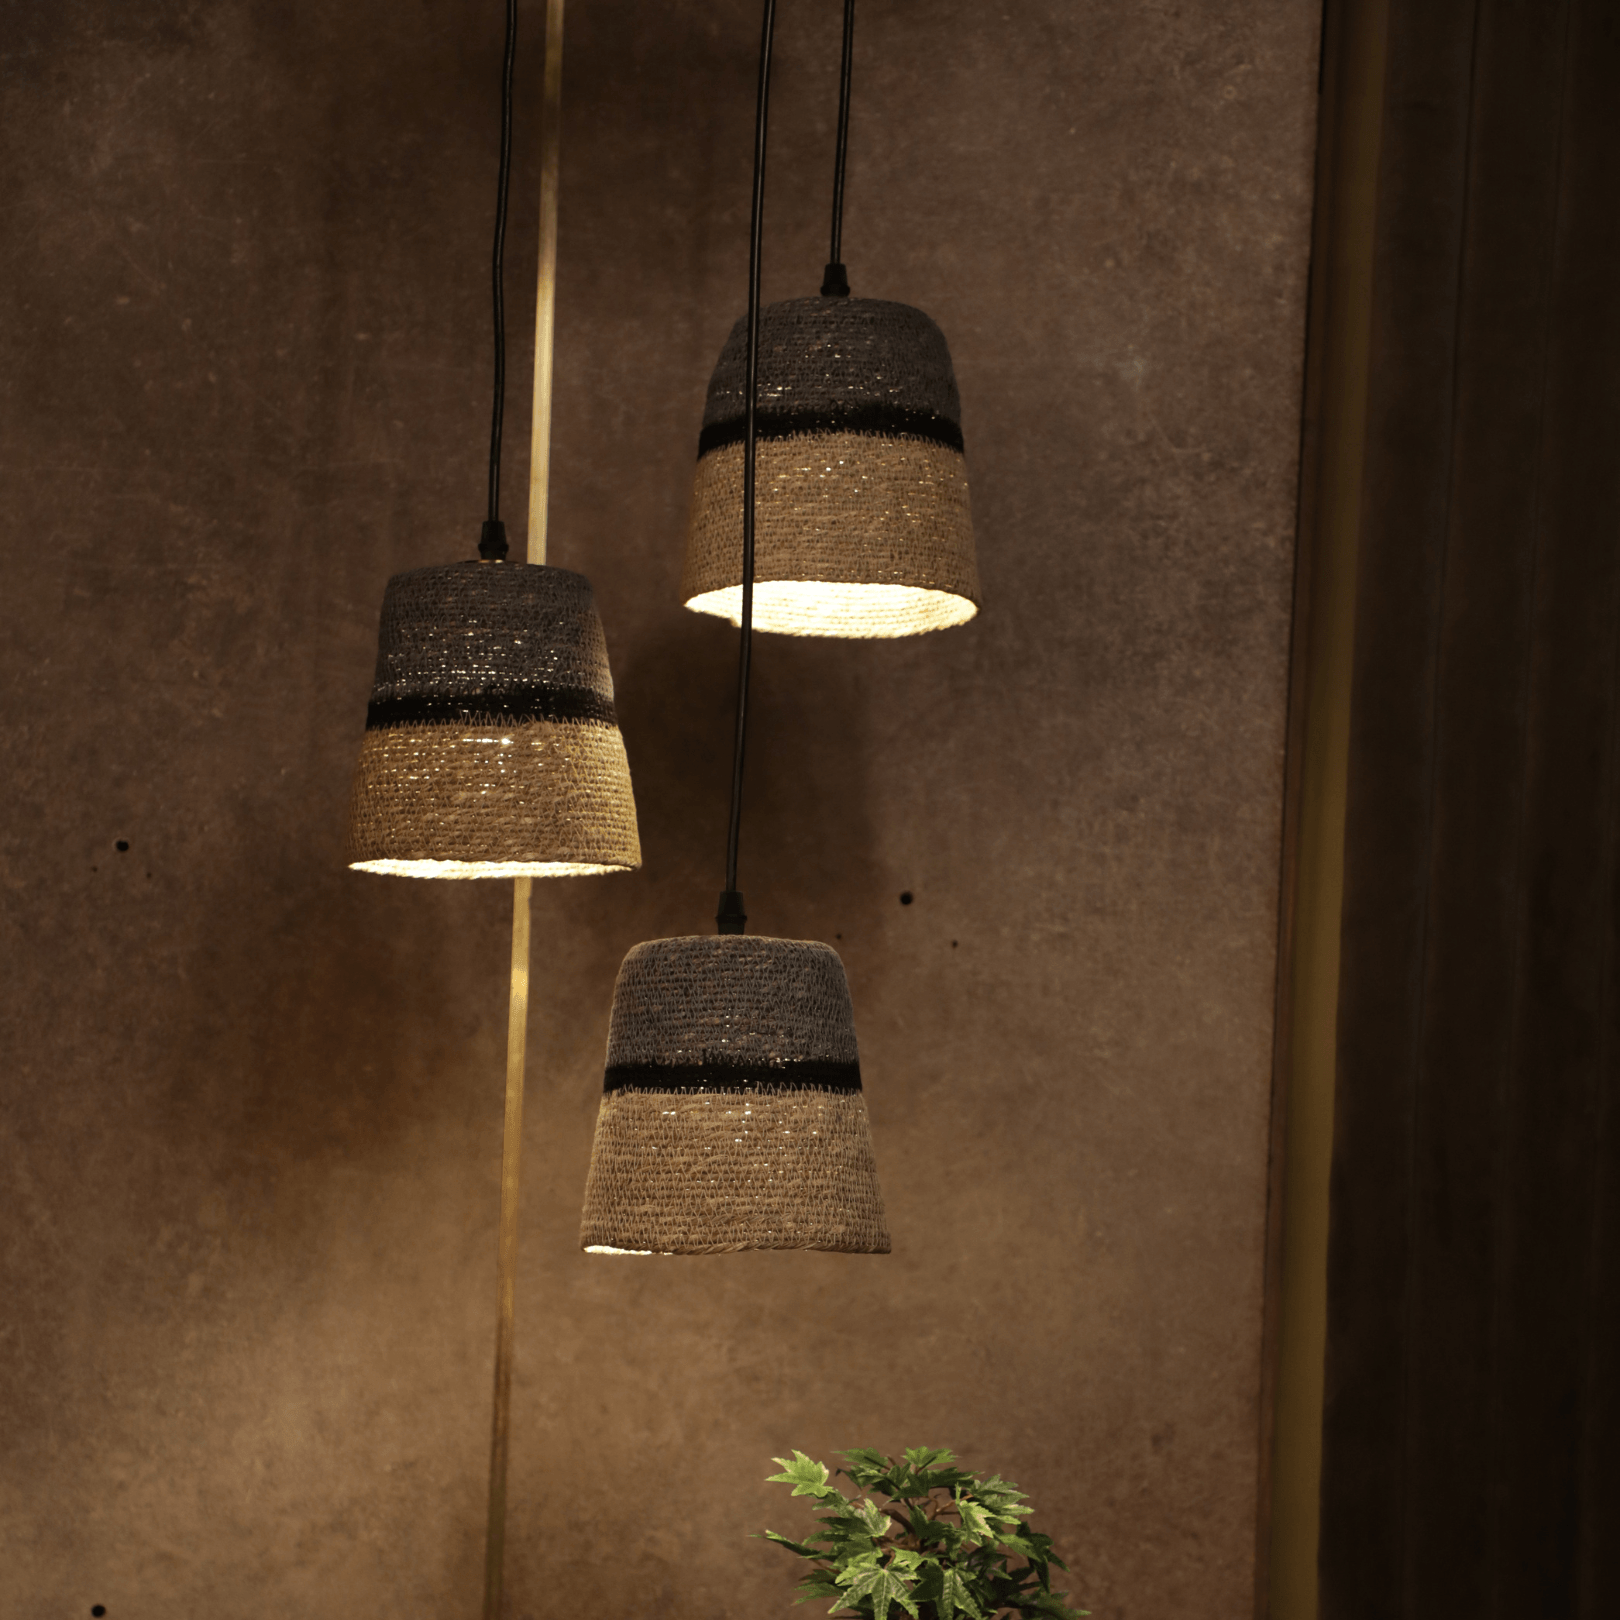 Deluxa Handcrafted Pendant Light by The Light Library